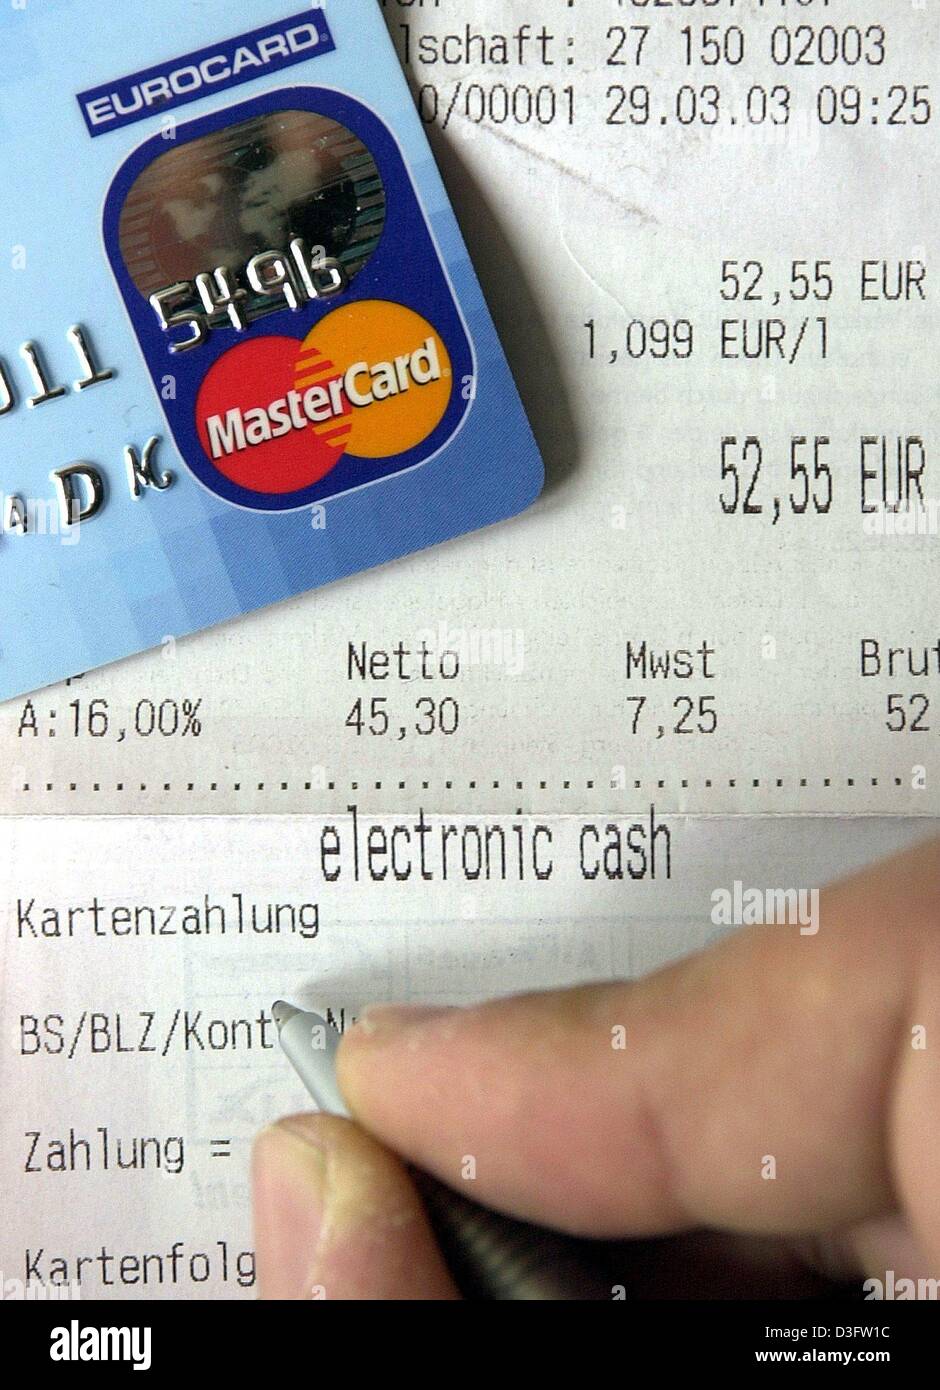 (dpa) - A MasterCard credit card lies on the receipt which is signed to confirm the payment, pictured in Frankfurt, 29 April 2003. In Germany, credit cards are not as popular as in other countries: most shop-owners and restaurants prefer payments with the EC-card, a bank card which is free of any charges. Stock Photo